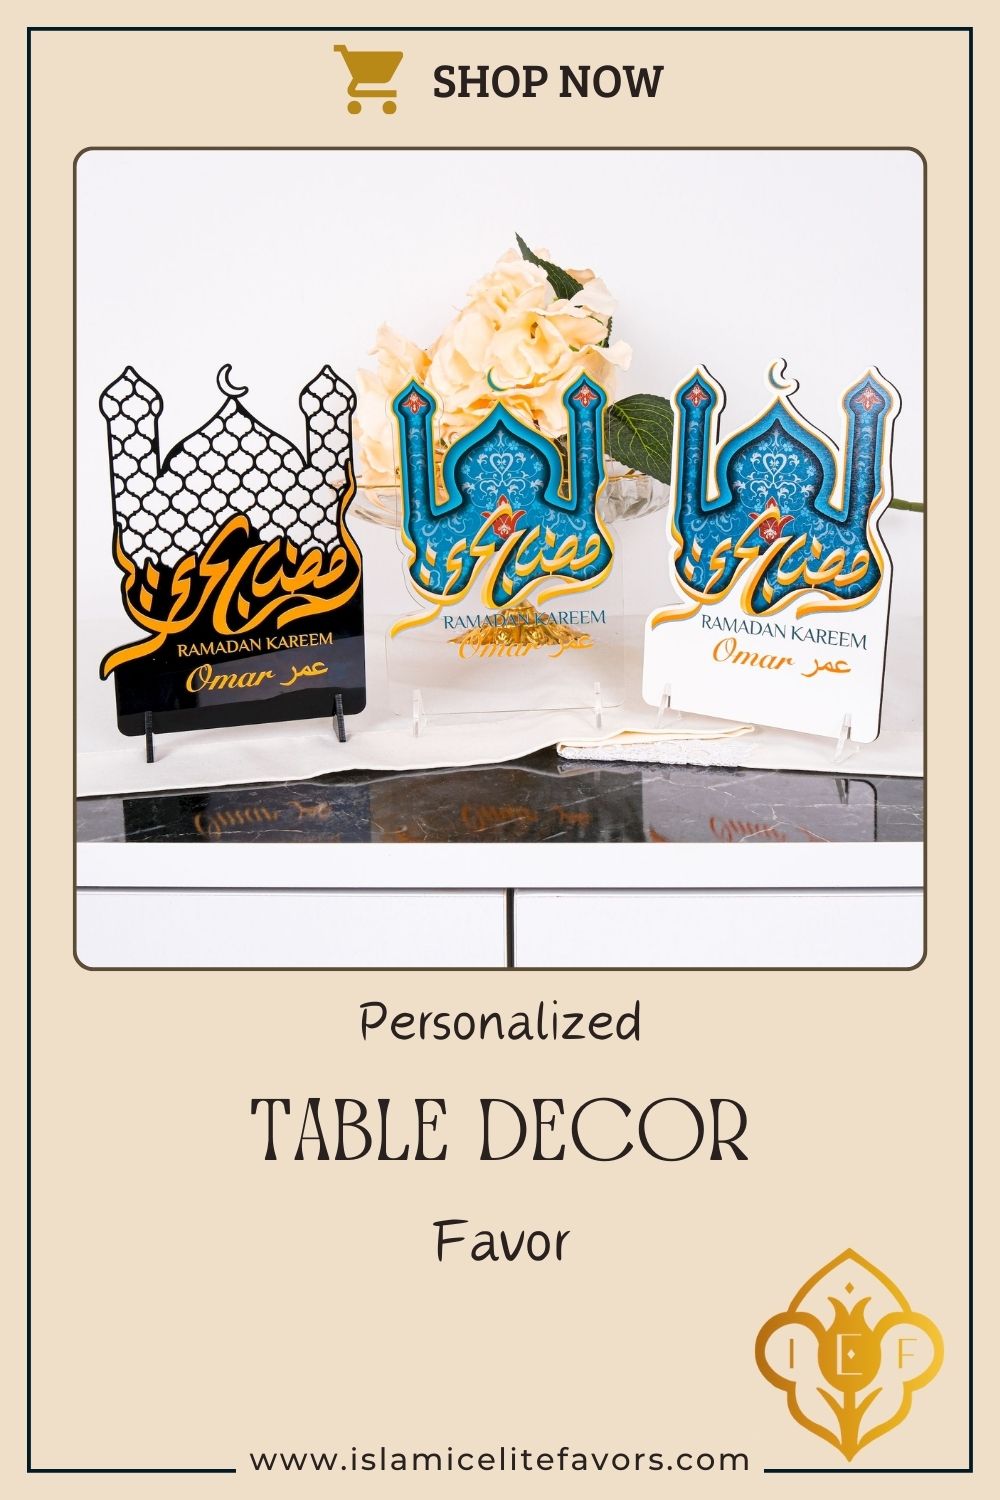 Personalized Ramadan Eid Table Decor Islamic Favor Tabletop Sign Stand - Islamic Elite Favors is a handmade gift shop offering a wide variety of unique and personalized gifts for all occasions. Whether you're looking for the perfect Ramadan, Eid, Hajj, wedding gift or something special for a birthday, baby shower or anniversary, we have something for everyone. High quality, made with love.